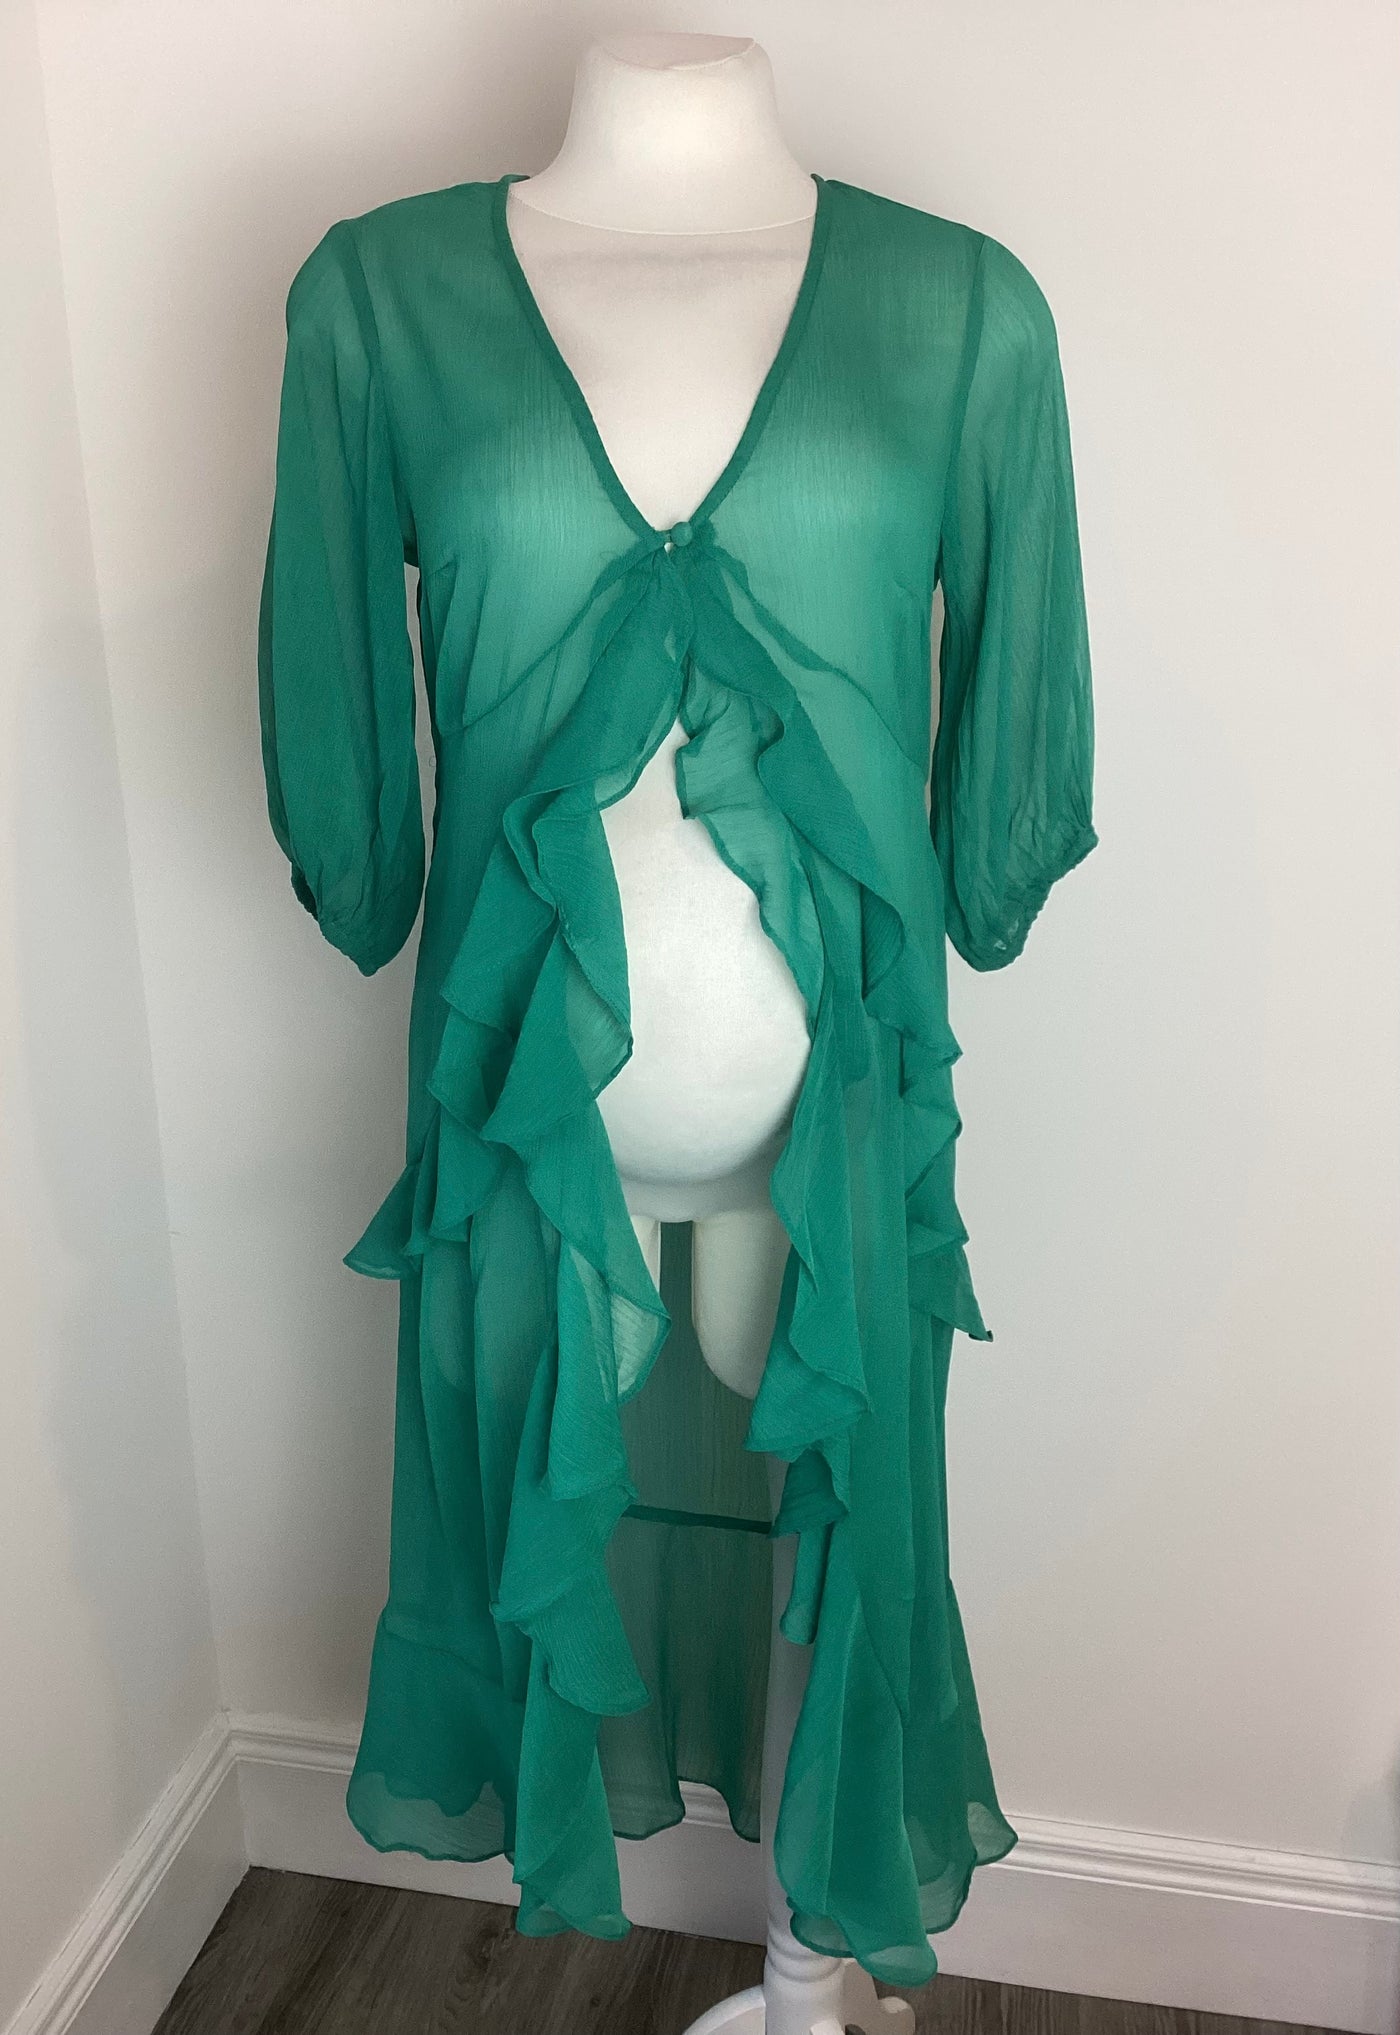 Asos Maternity green sheer one button, long line frill cardigan - Size 10